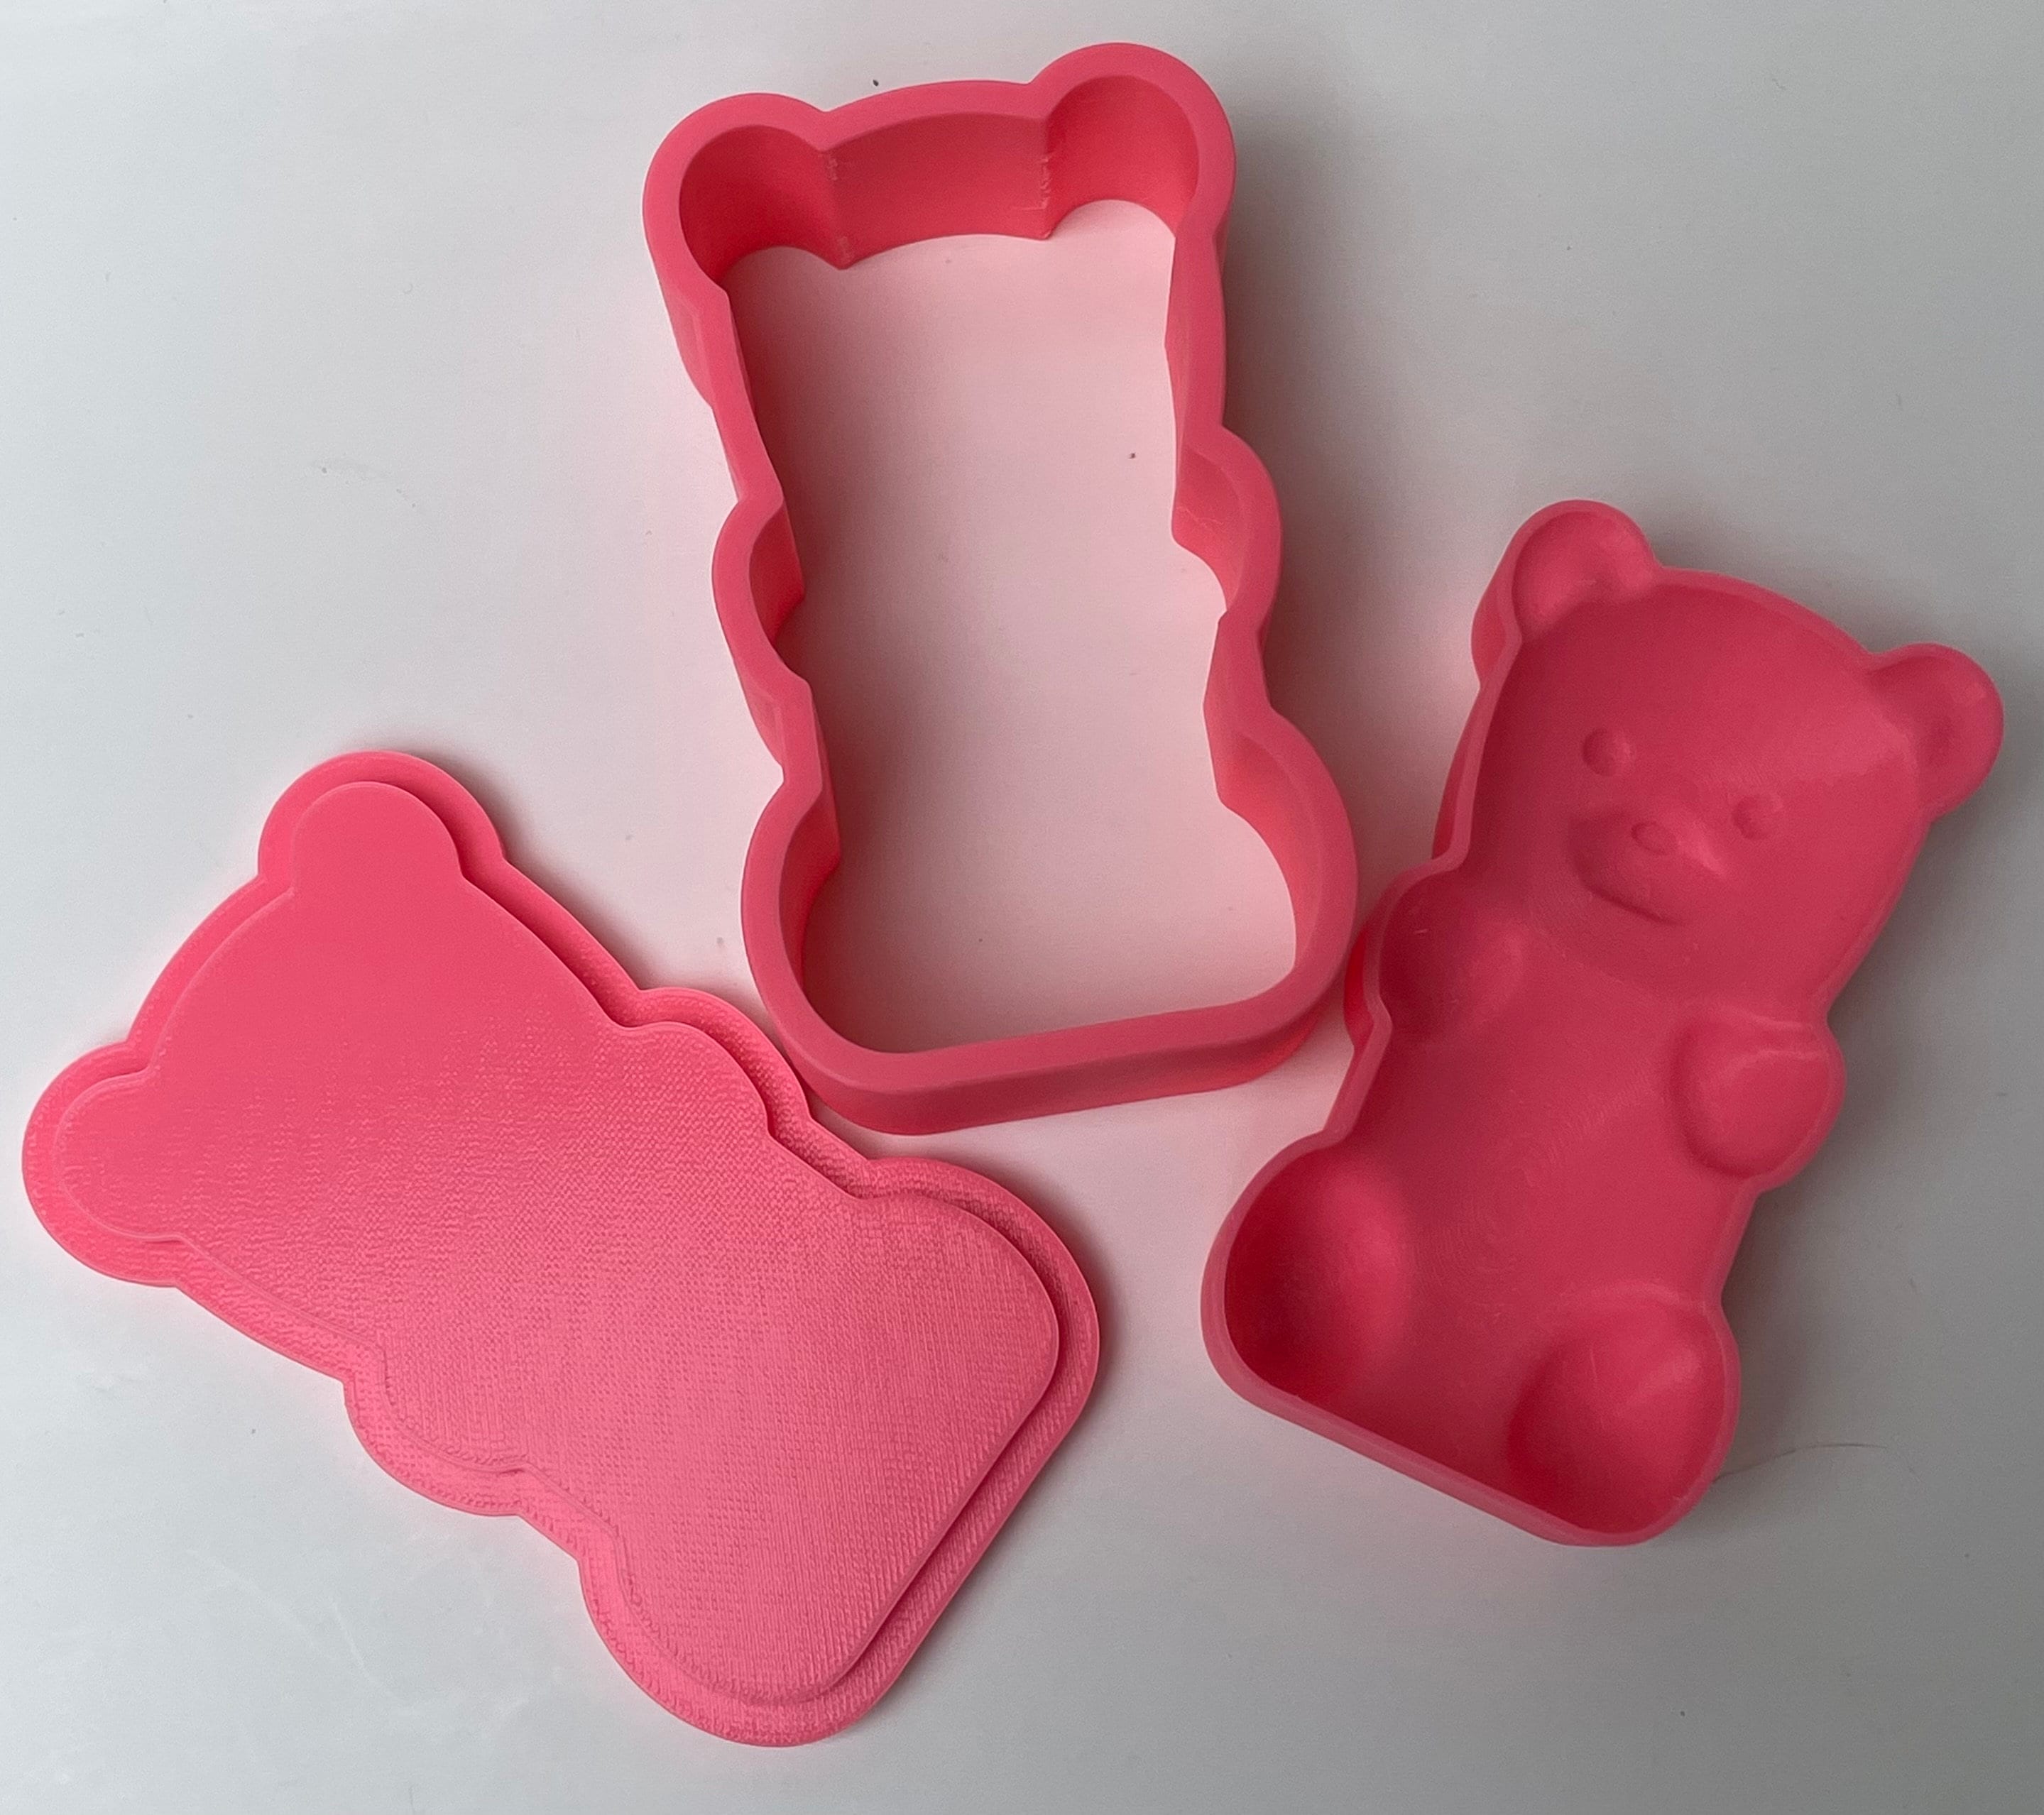 Gummy Bears Silicone Mold by Craft Smart®